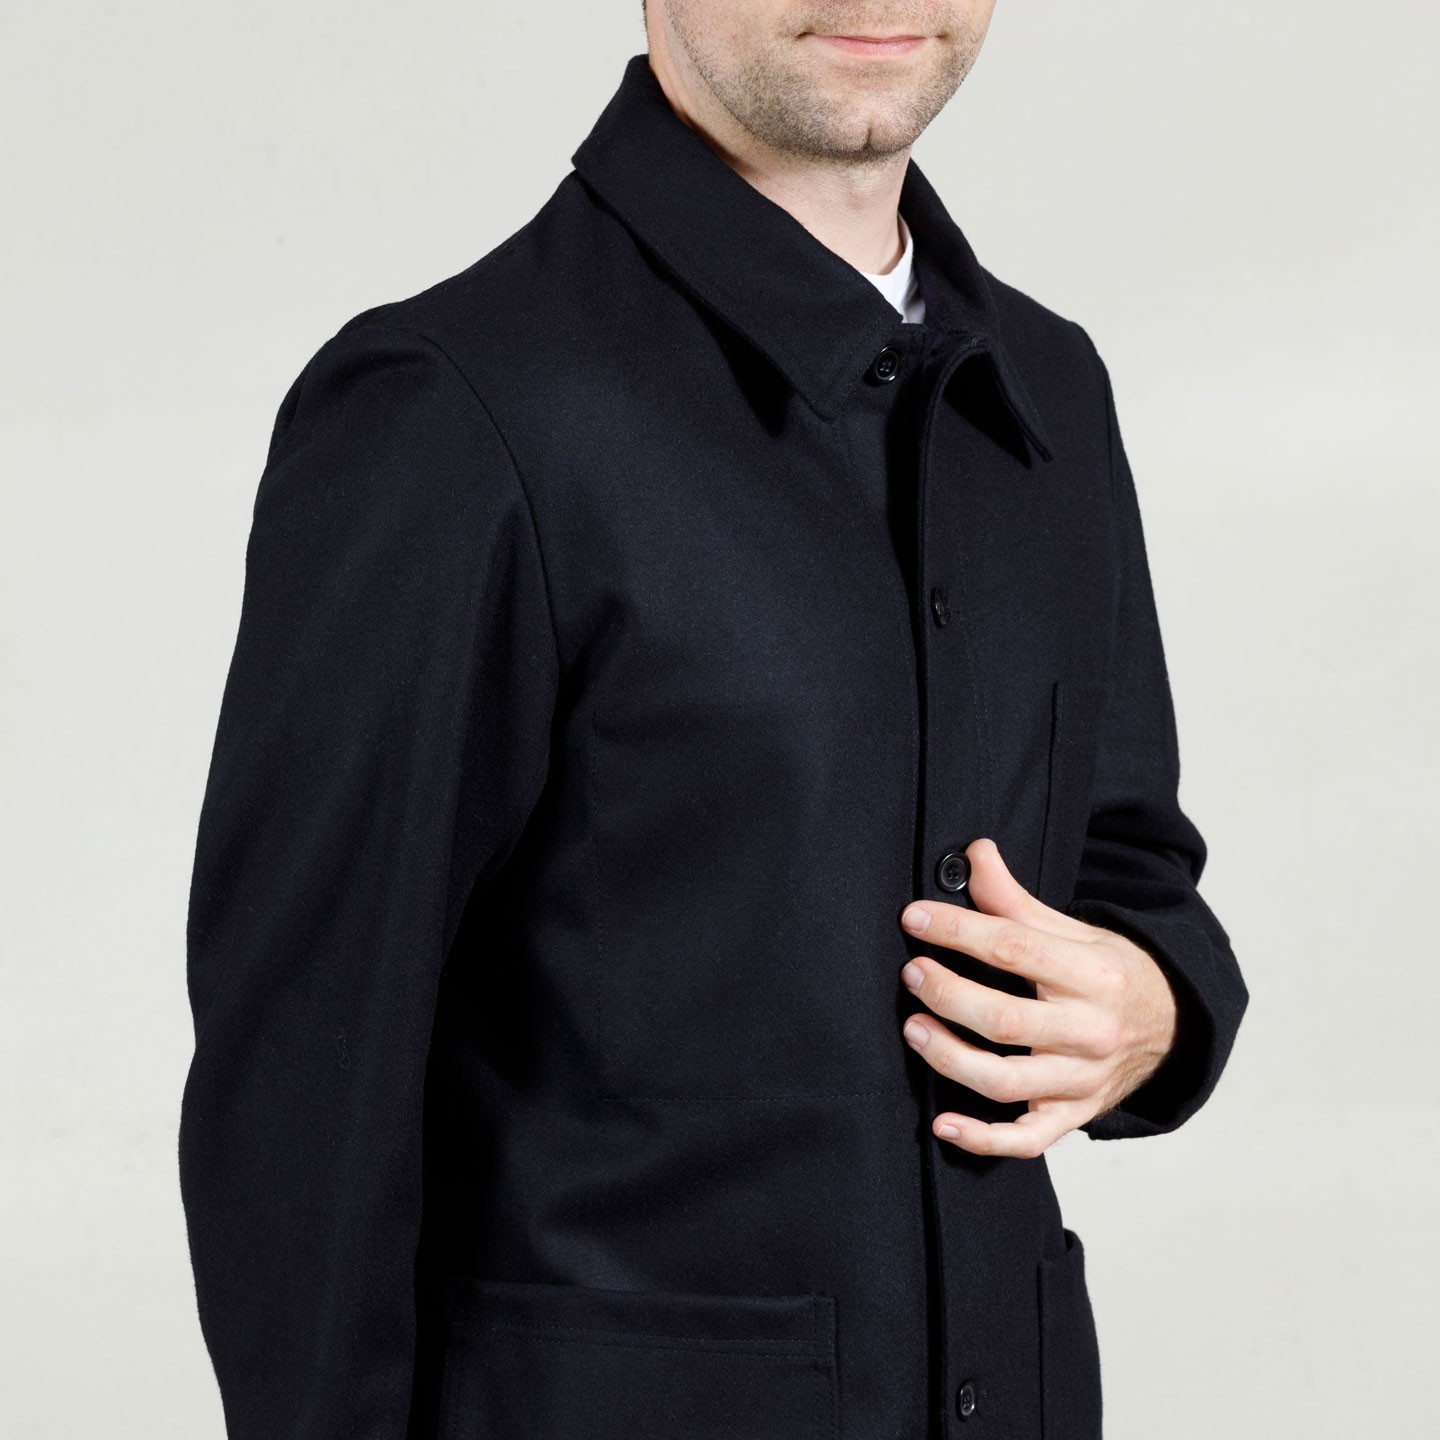 Men\'s coat - VETRA : Authentic French workwear 100% Made in France